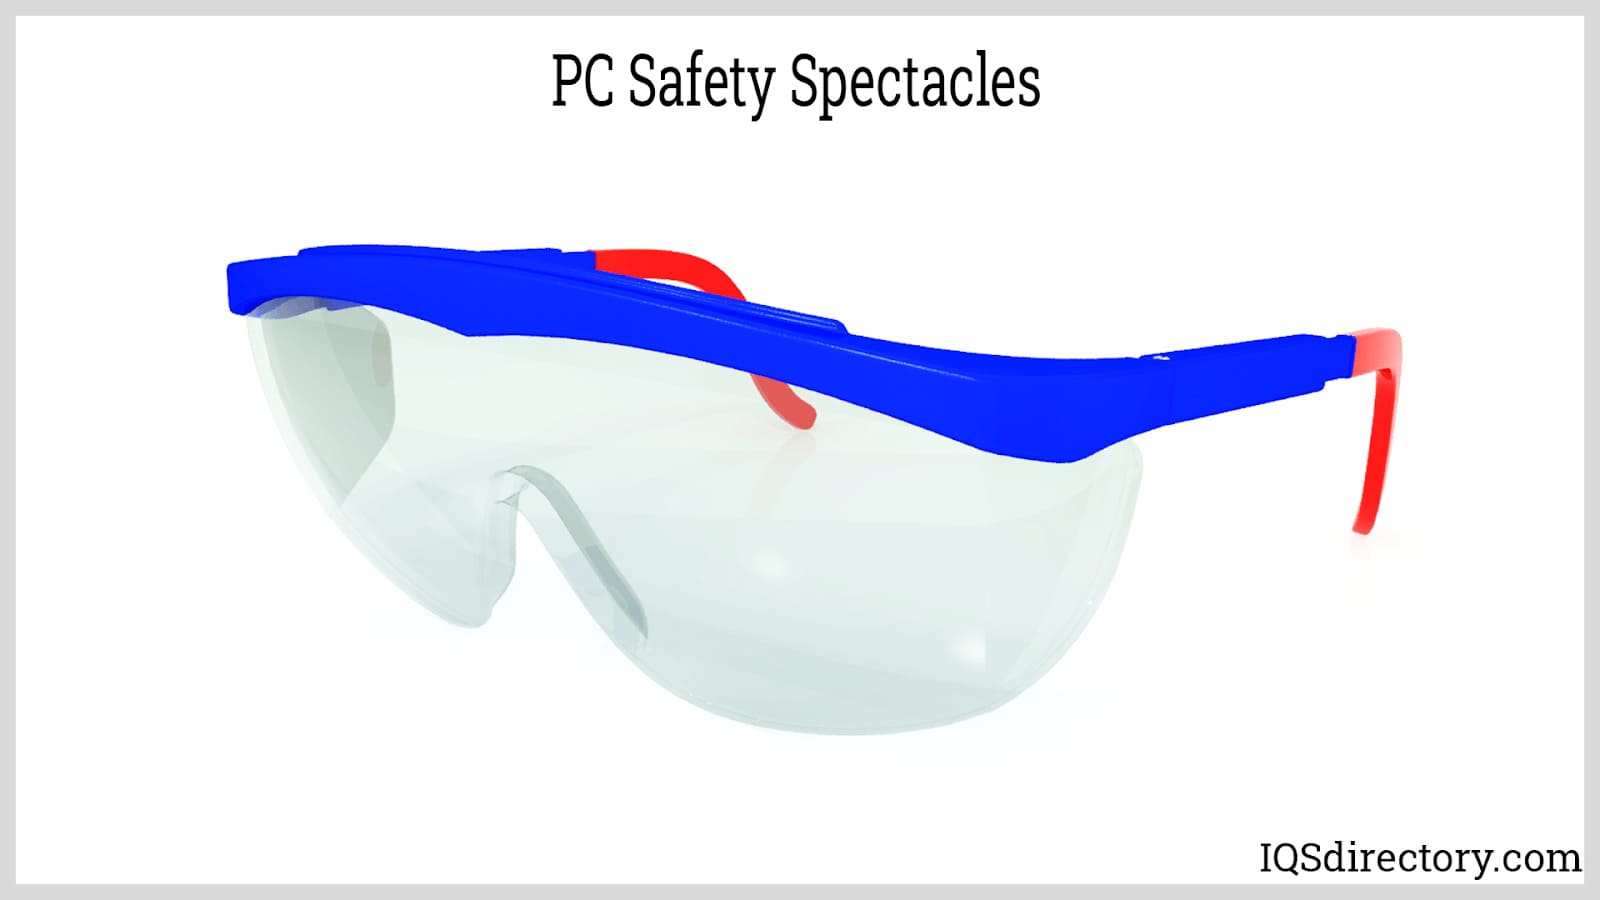 PC Safety Spectacles